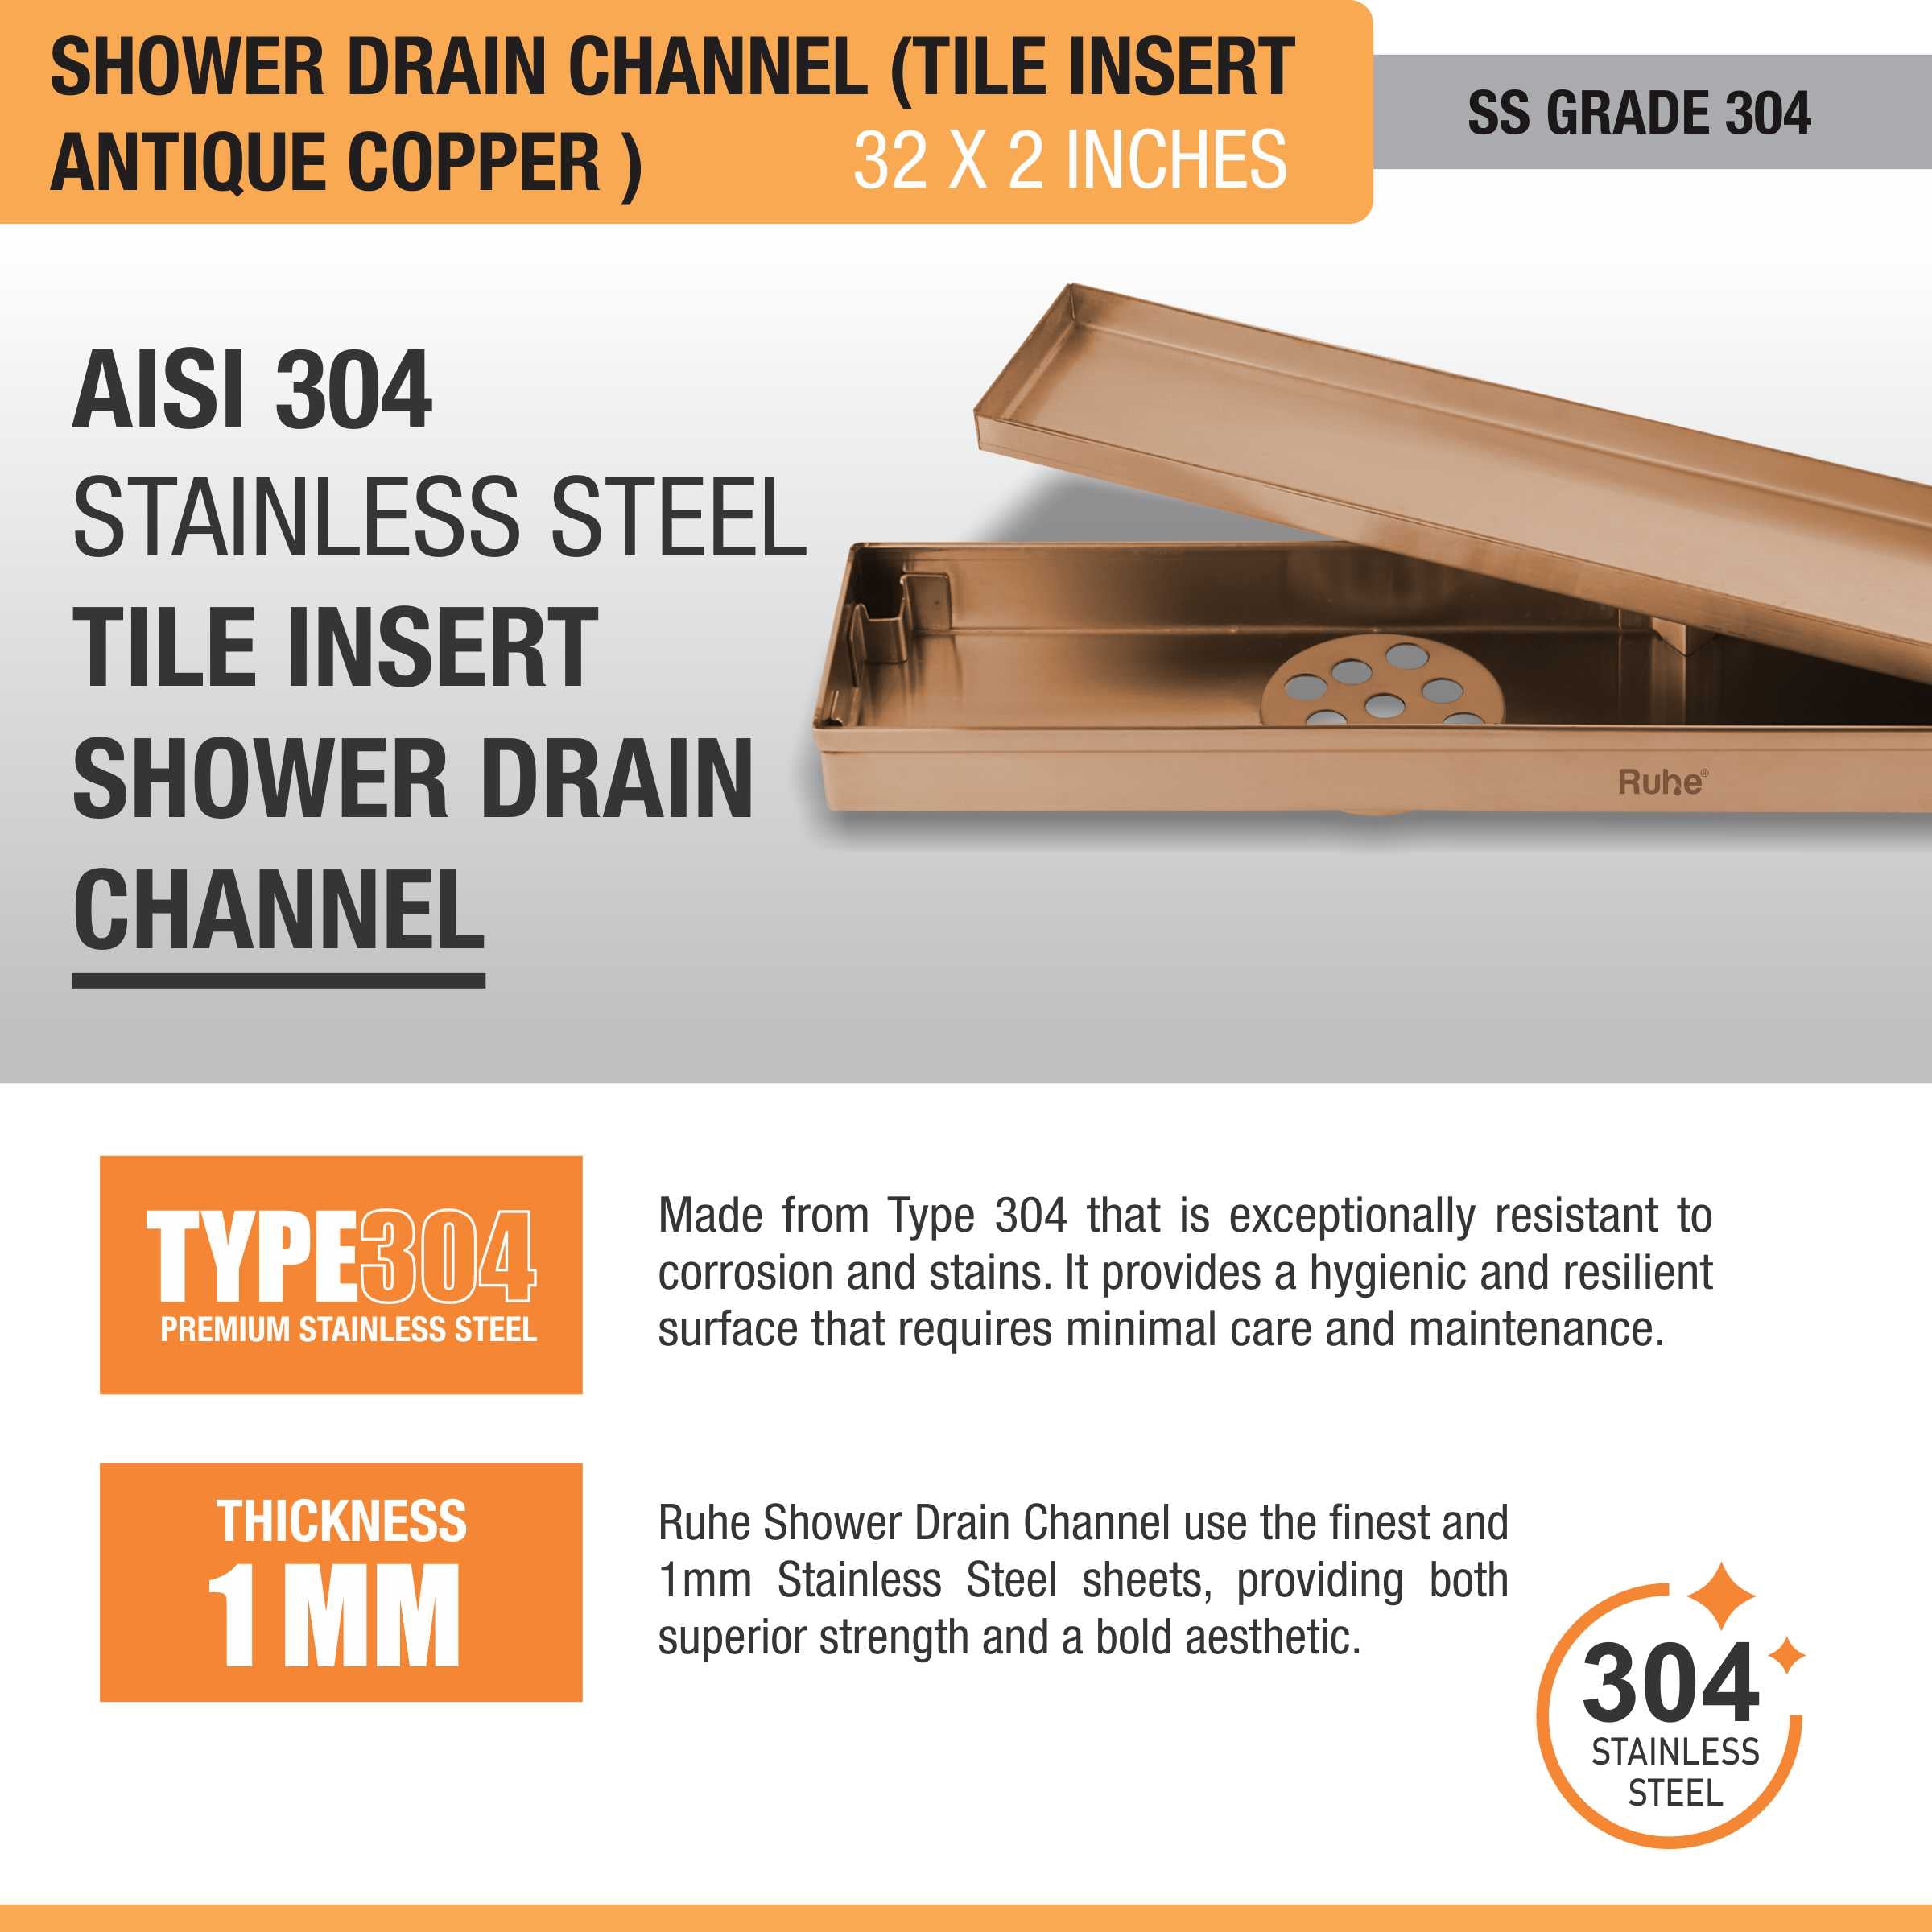 Tile Insert Shower Drain Channel (32 x 2 Inches) ROSE GOLD/ANTIQUE COPPER stainless steel